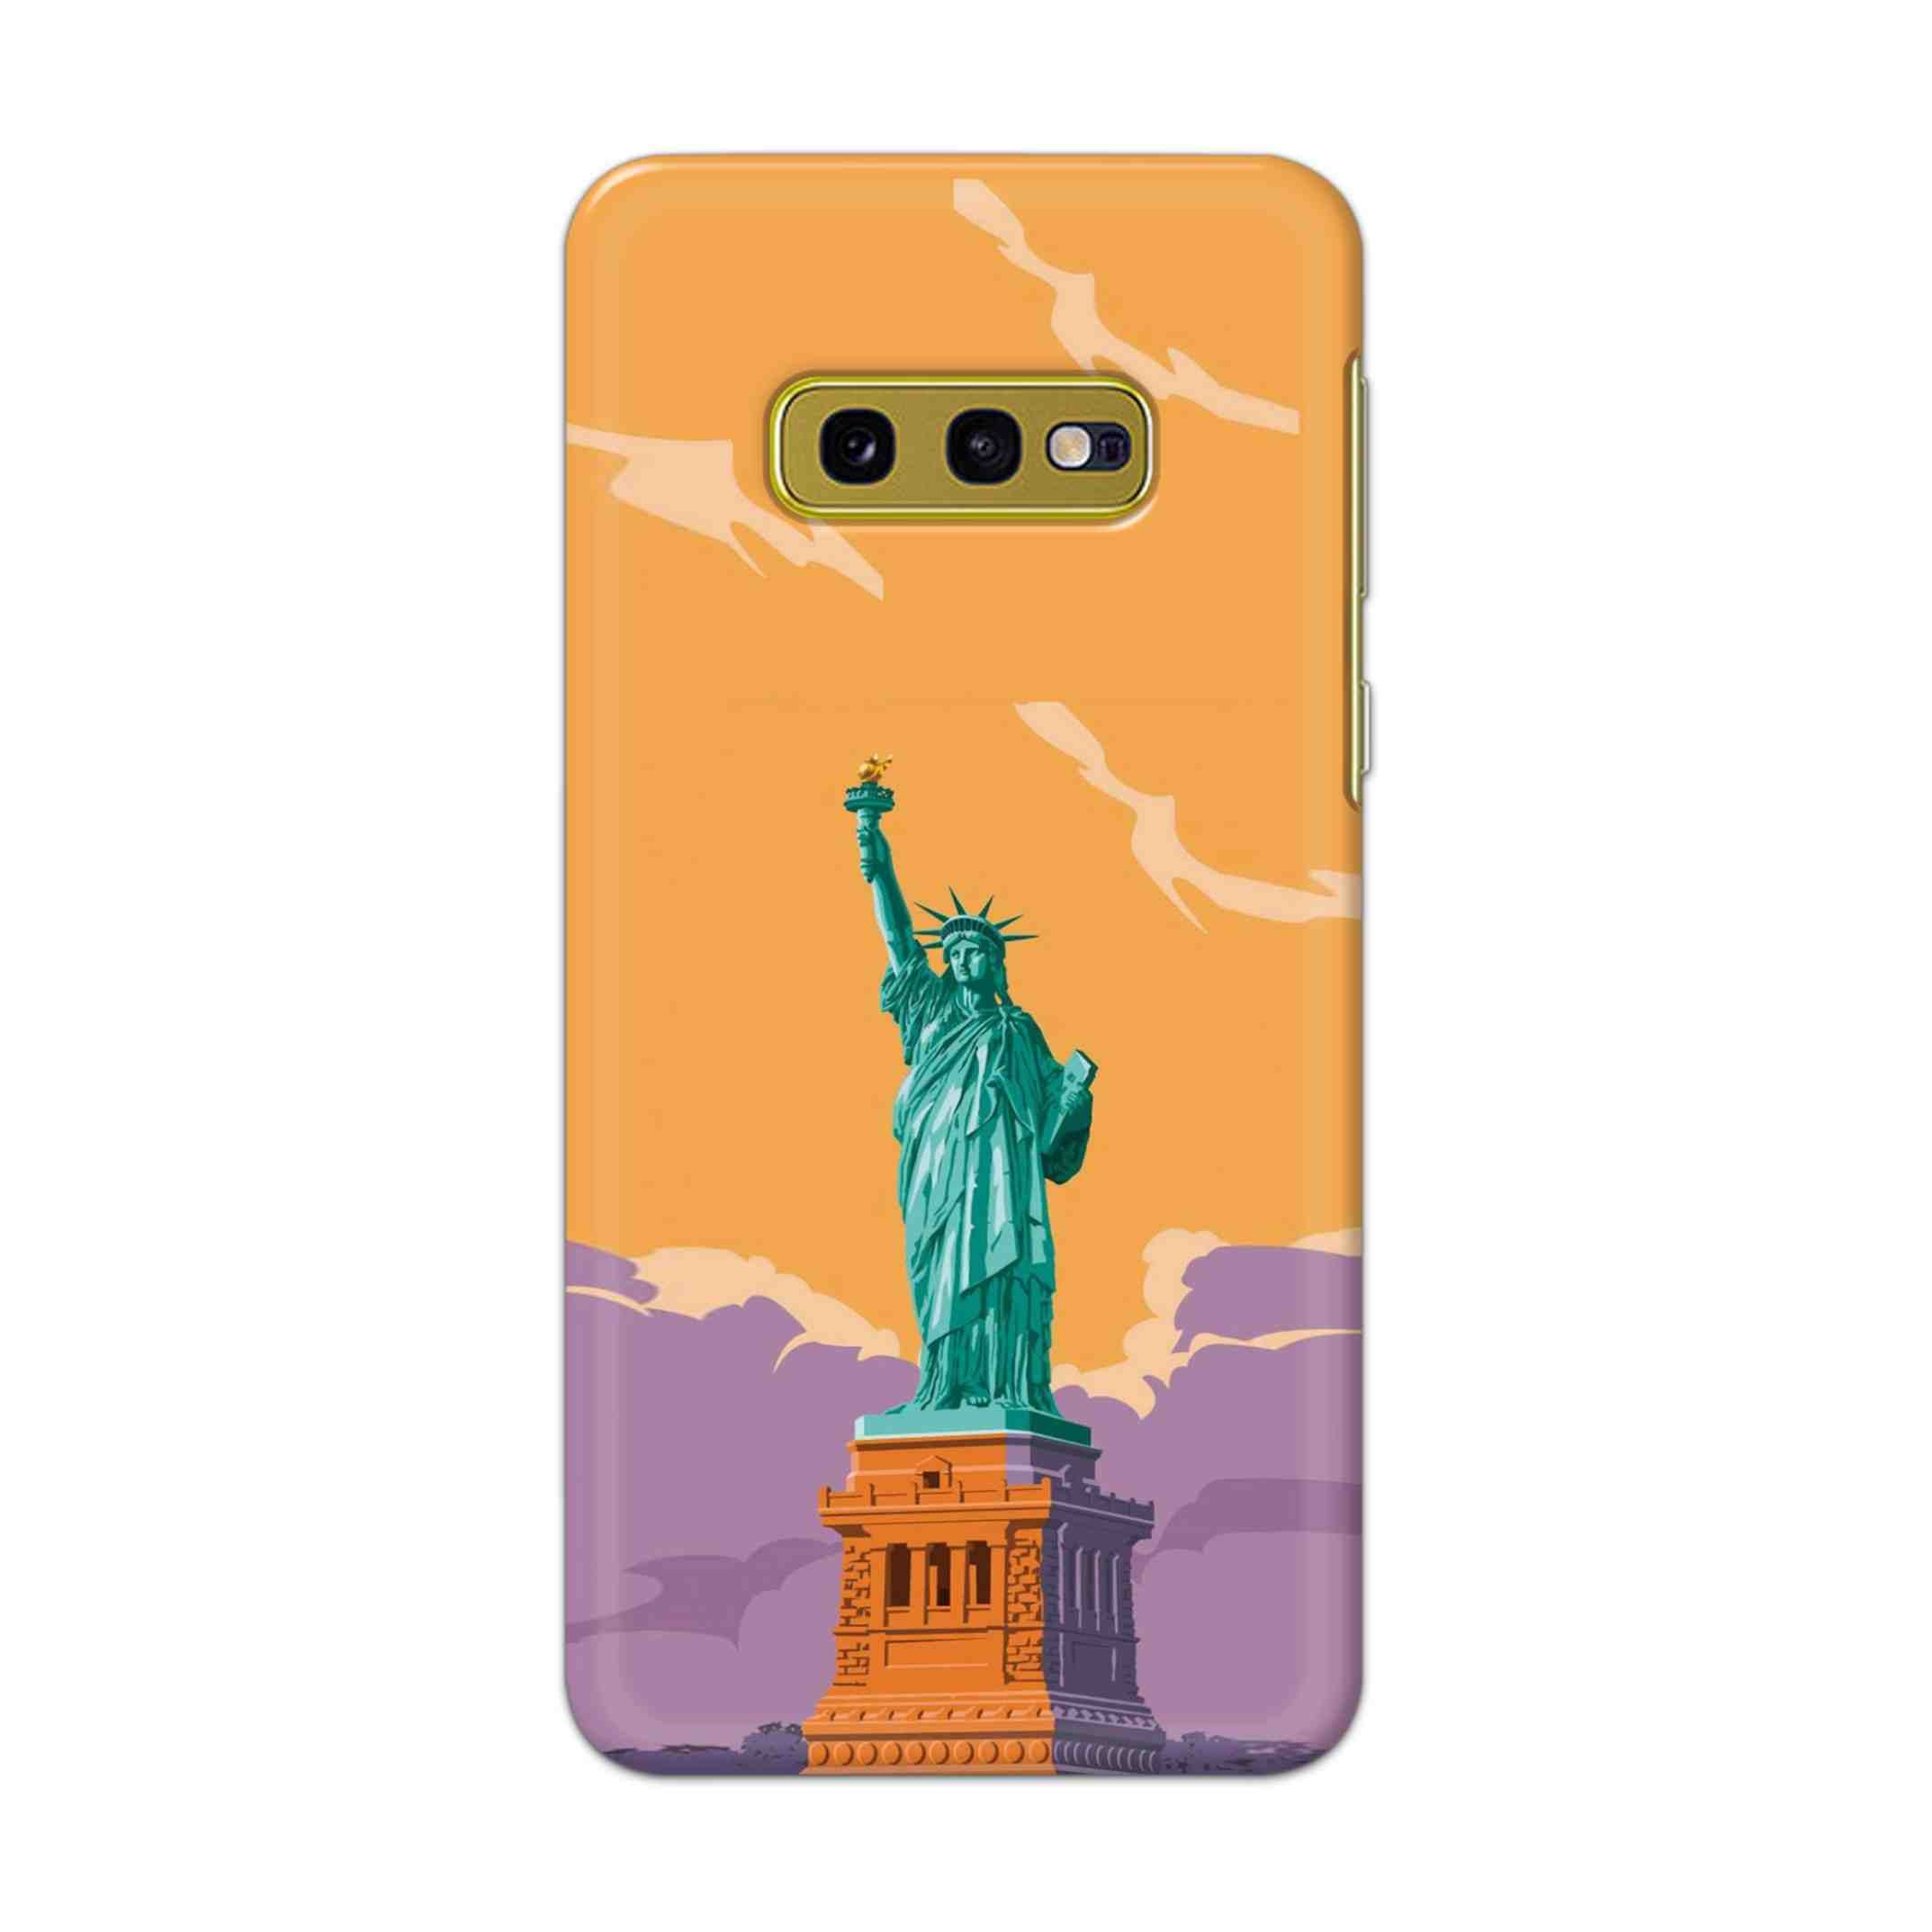 Buy Statue Of Liberty Hard Back Mobile Phone Case Cover For Samsung Galaxy S10e Online